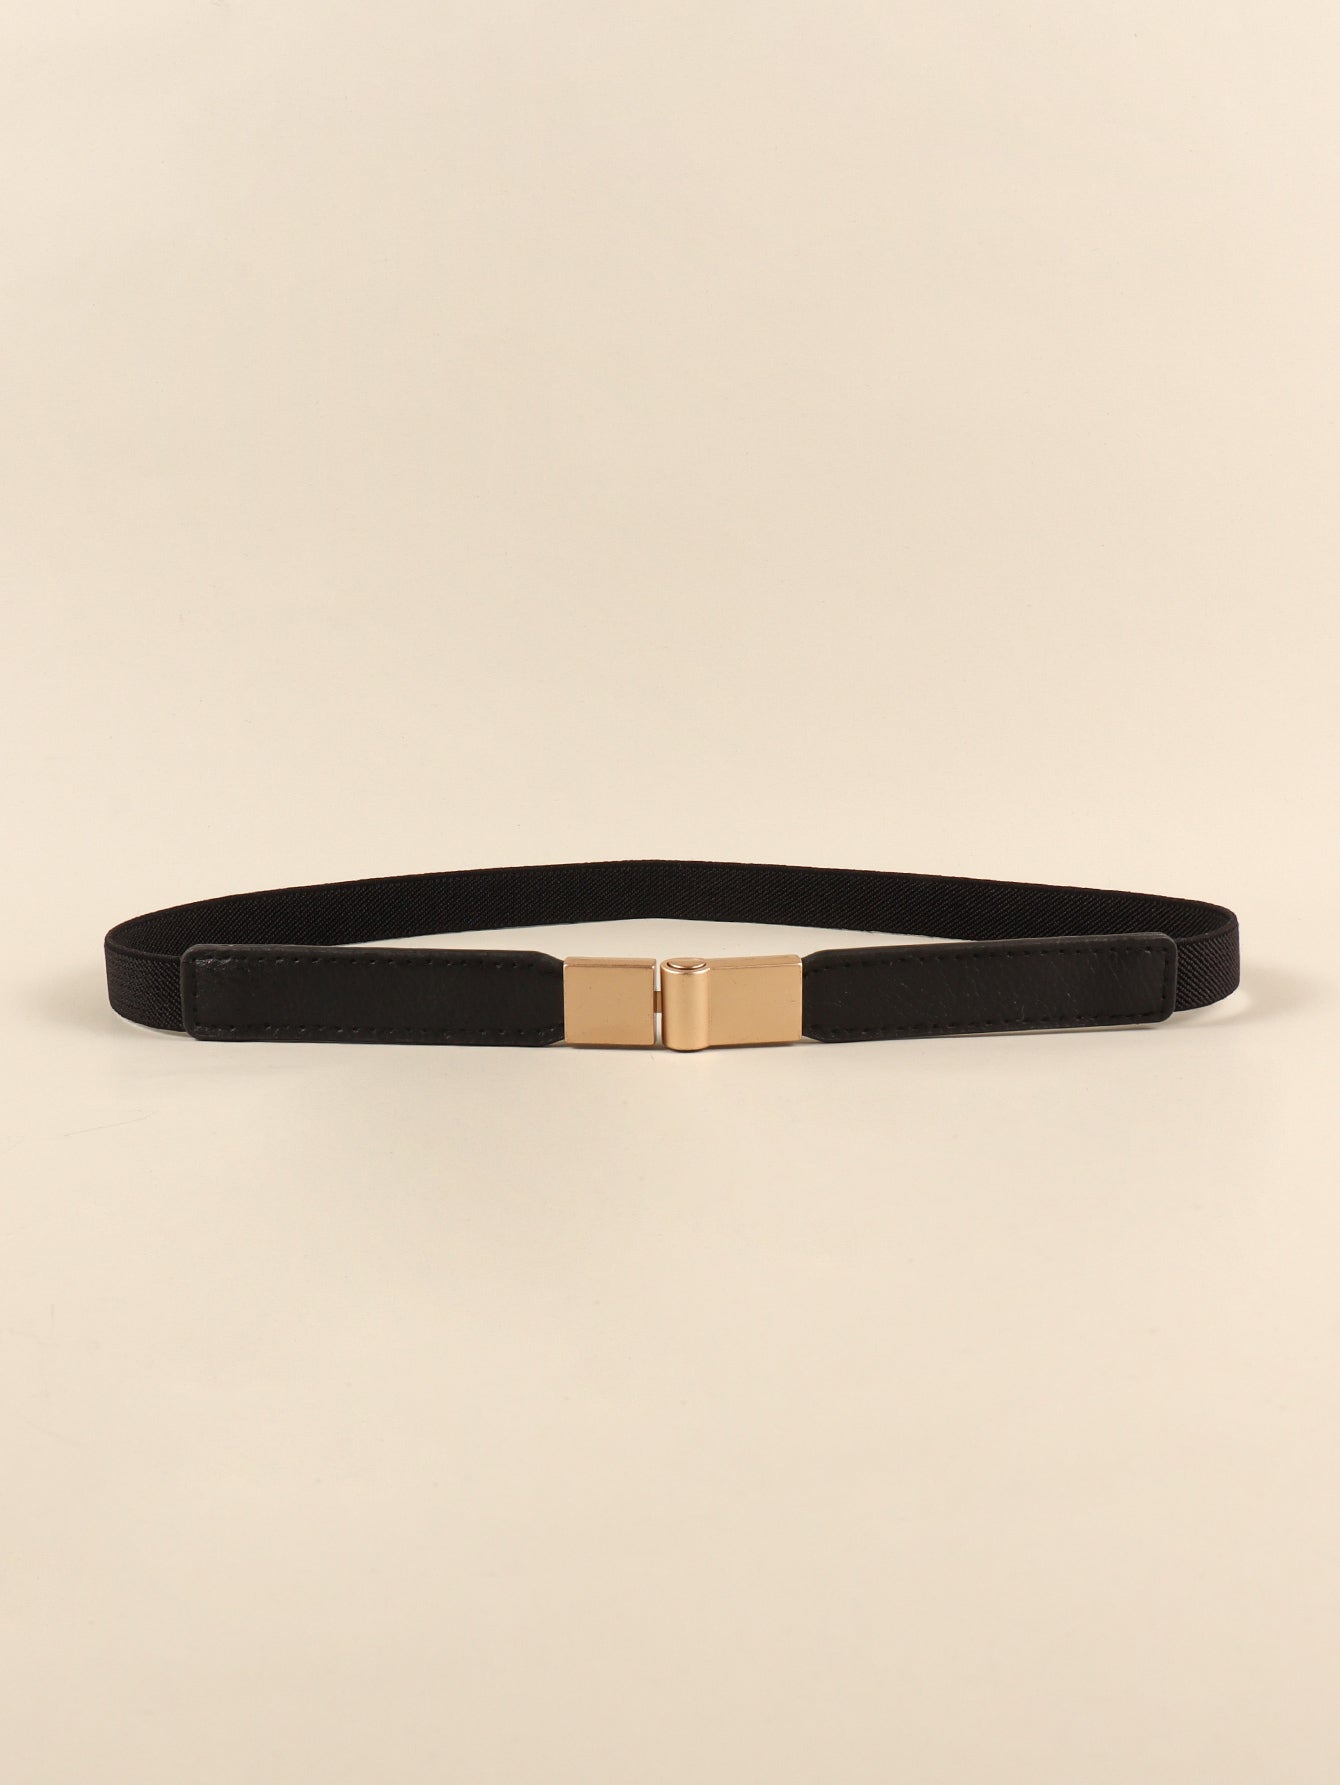 Thin leather strap included - options and sizes